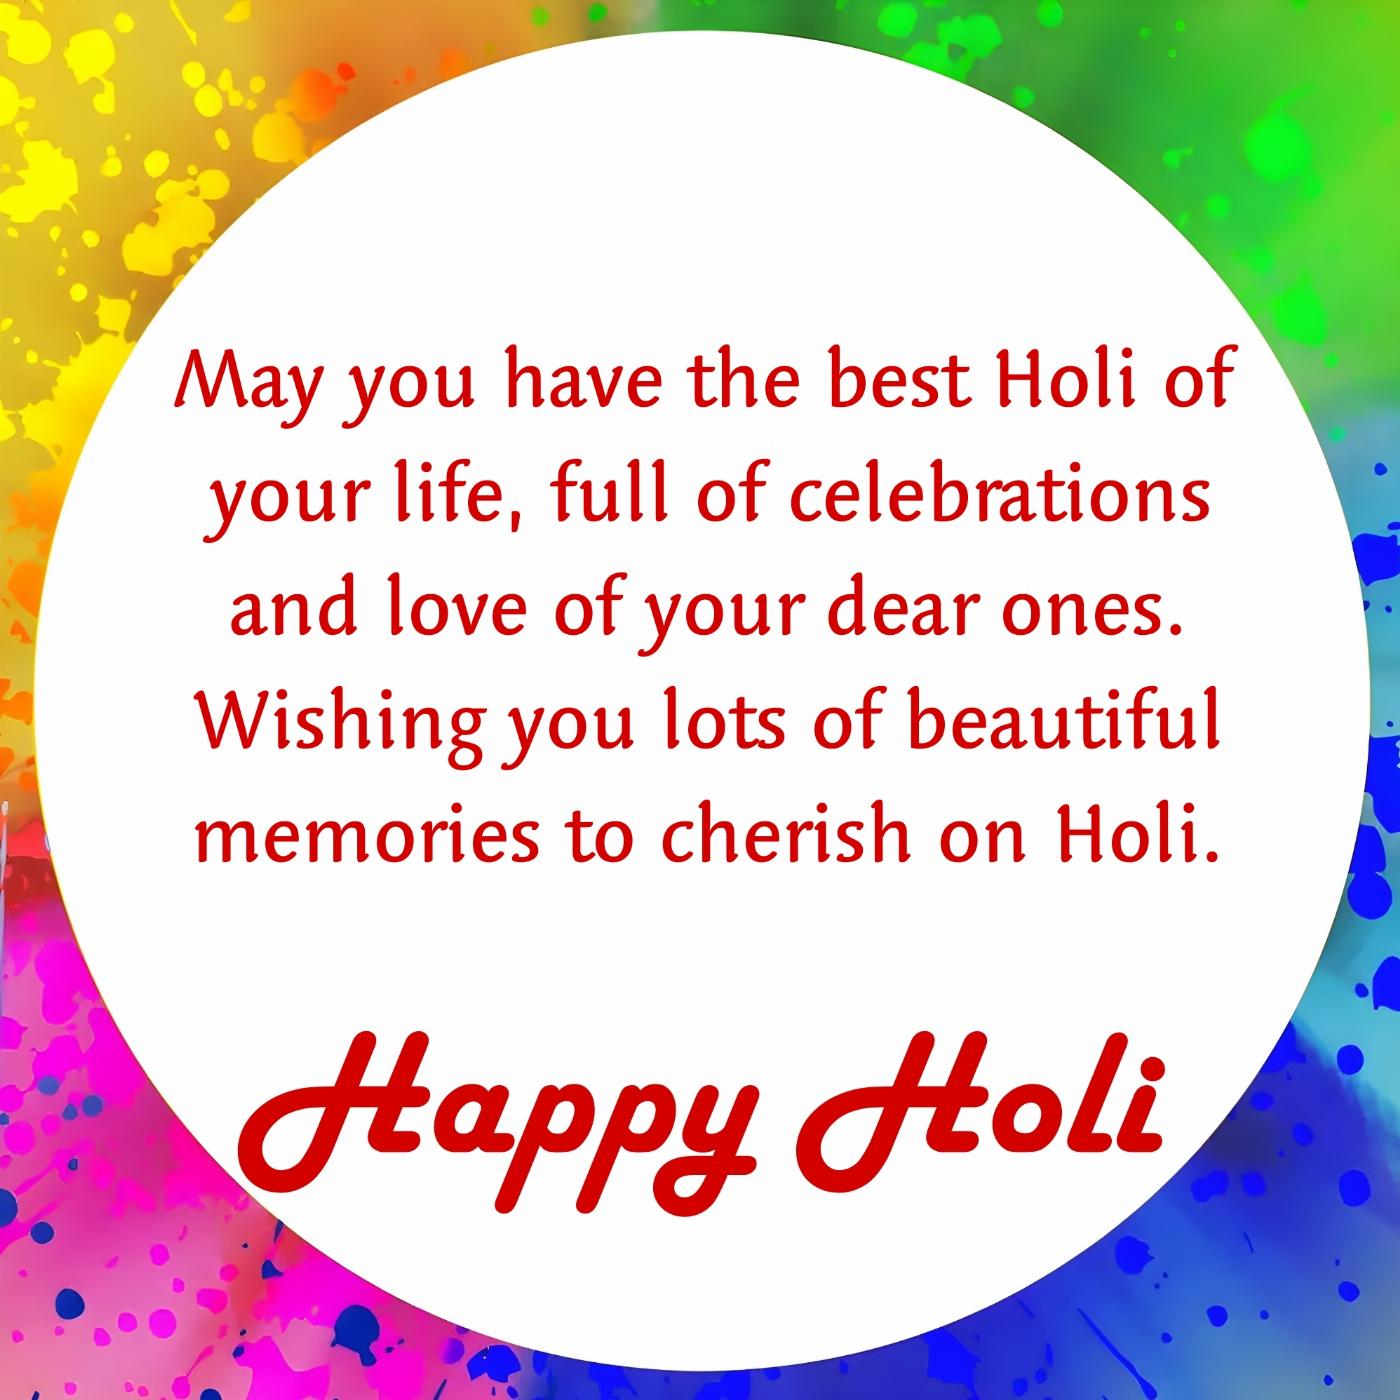 May you have the best Holi of your life